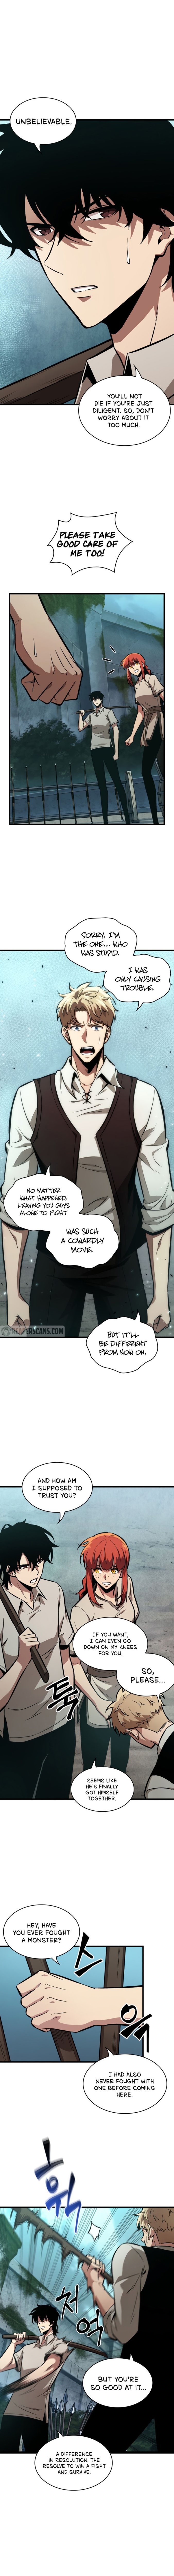 Pick Me Up - Chapter 5 Page 7